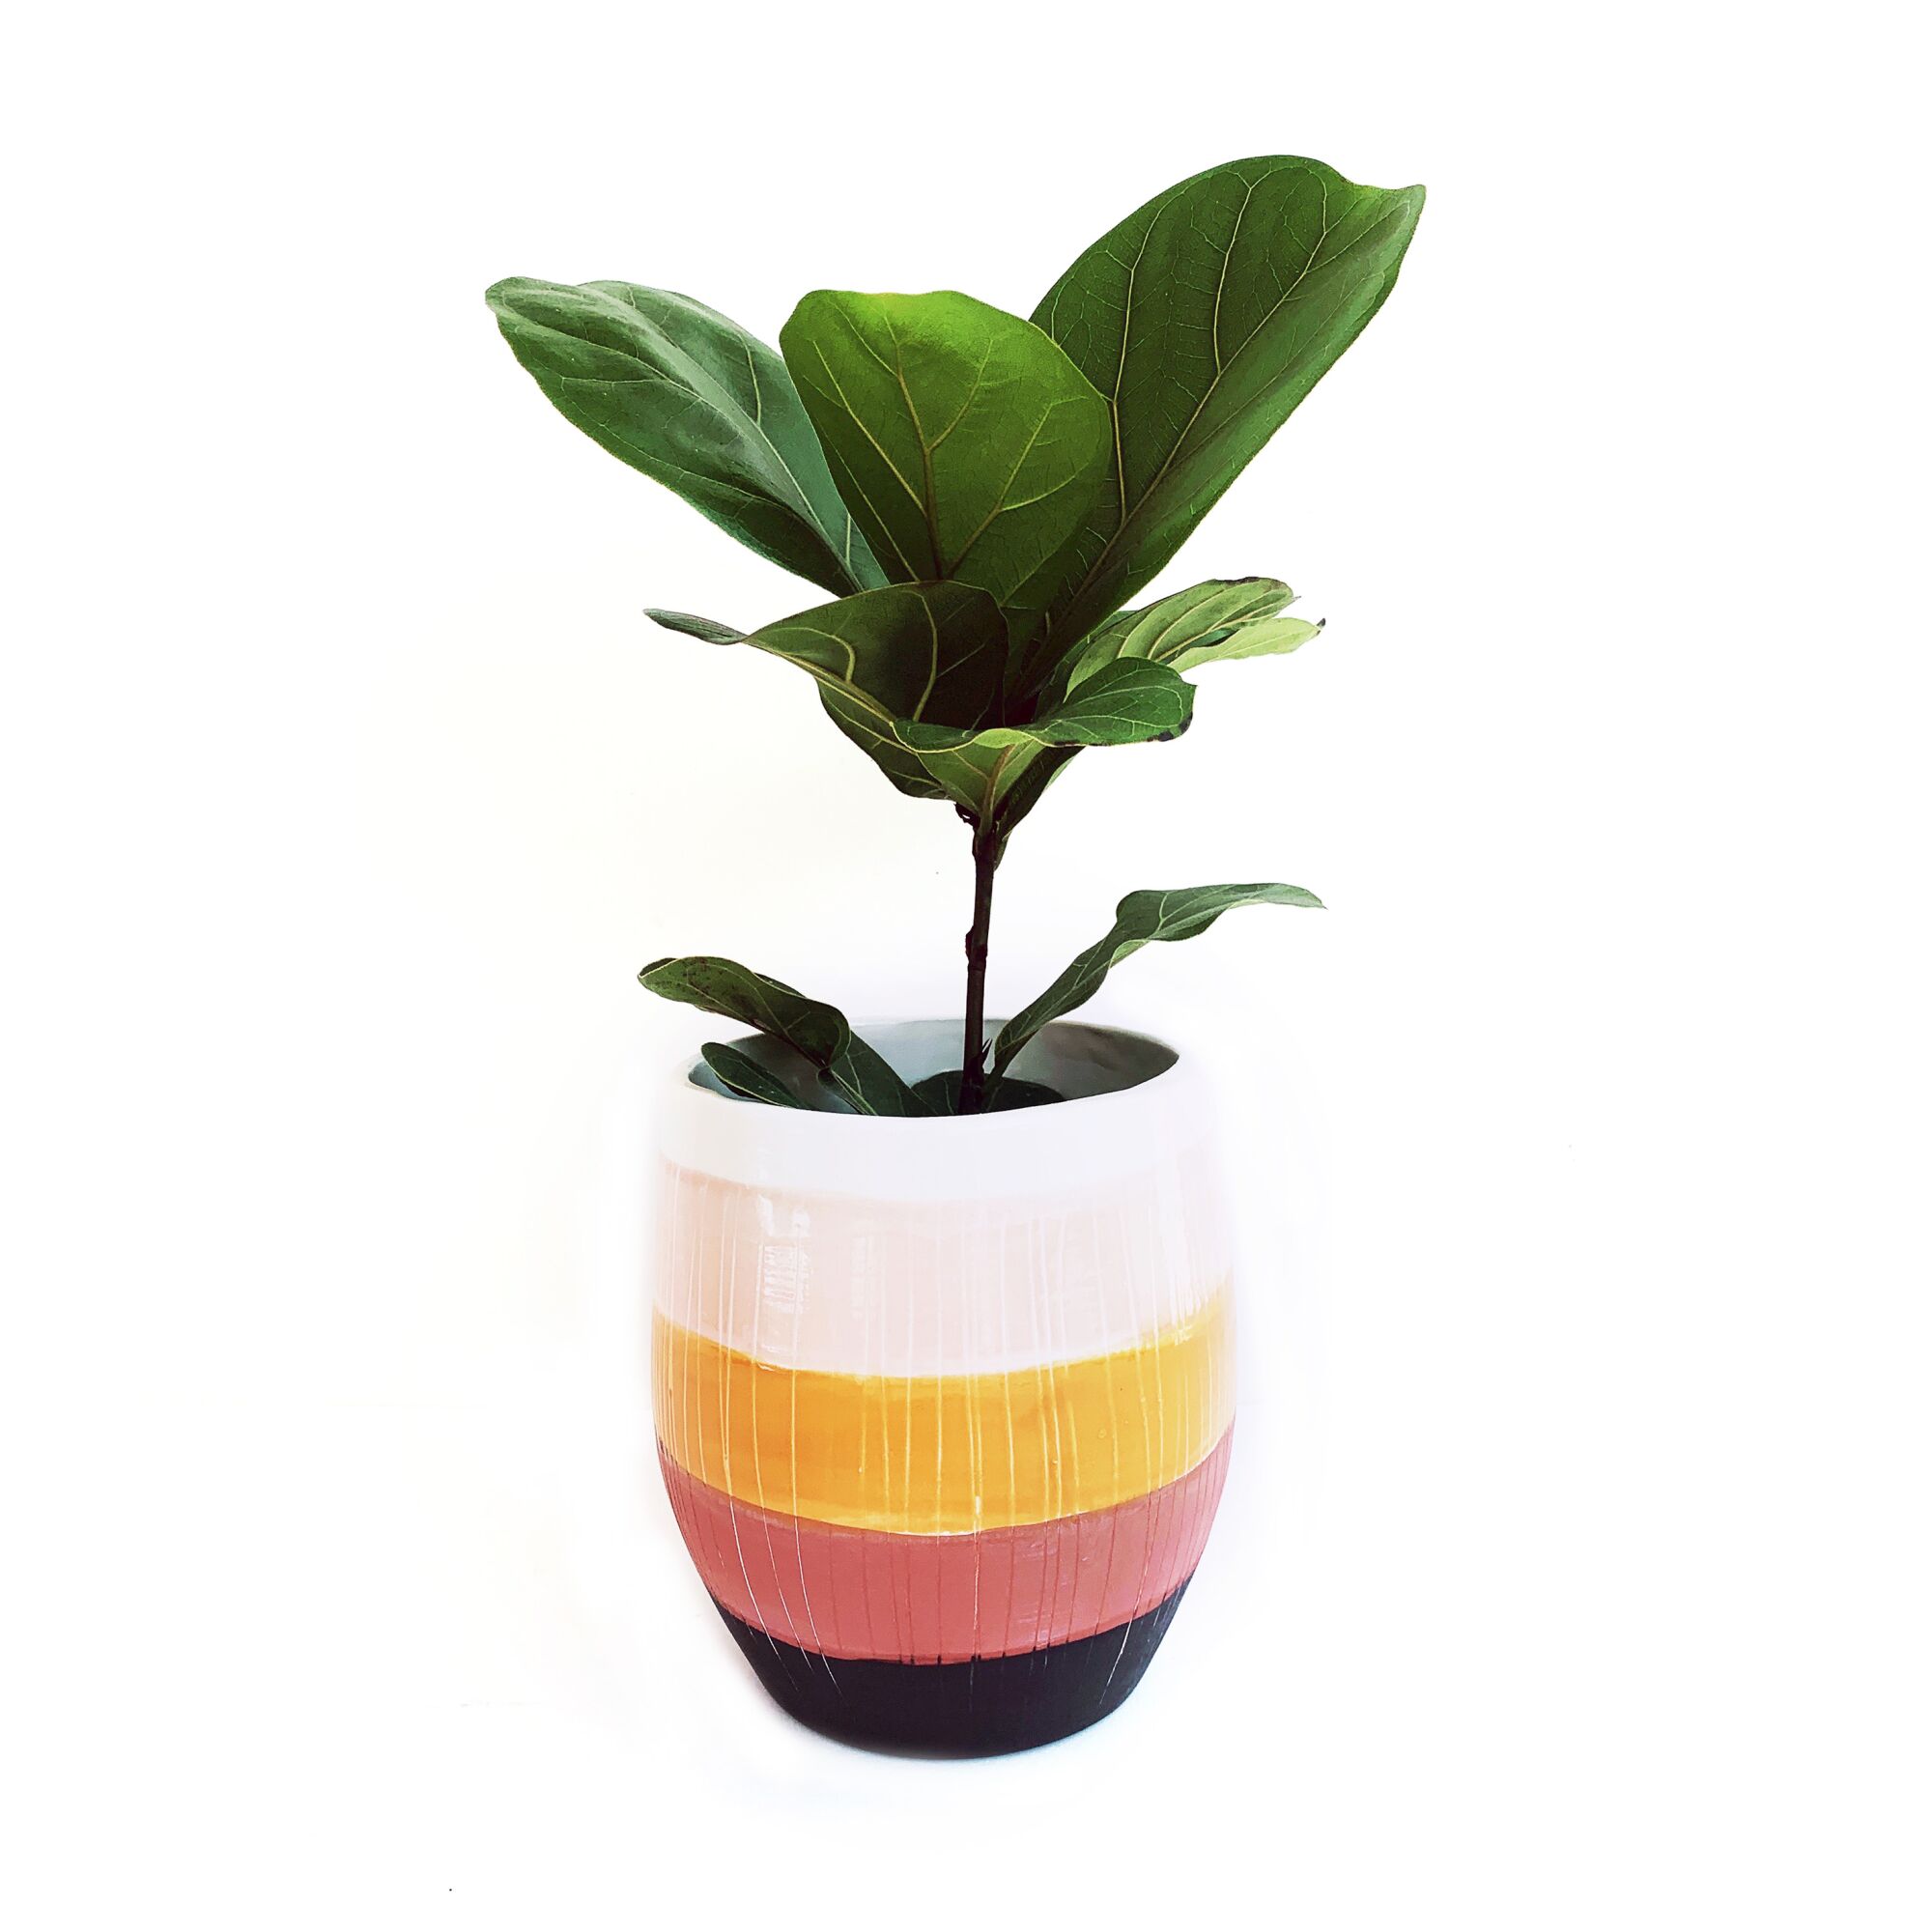 A striped planter, with a plant in it.